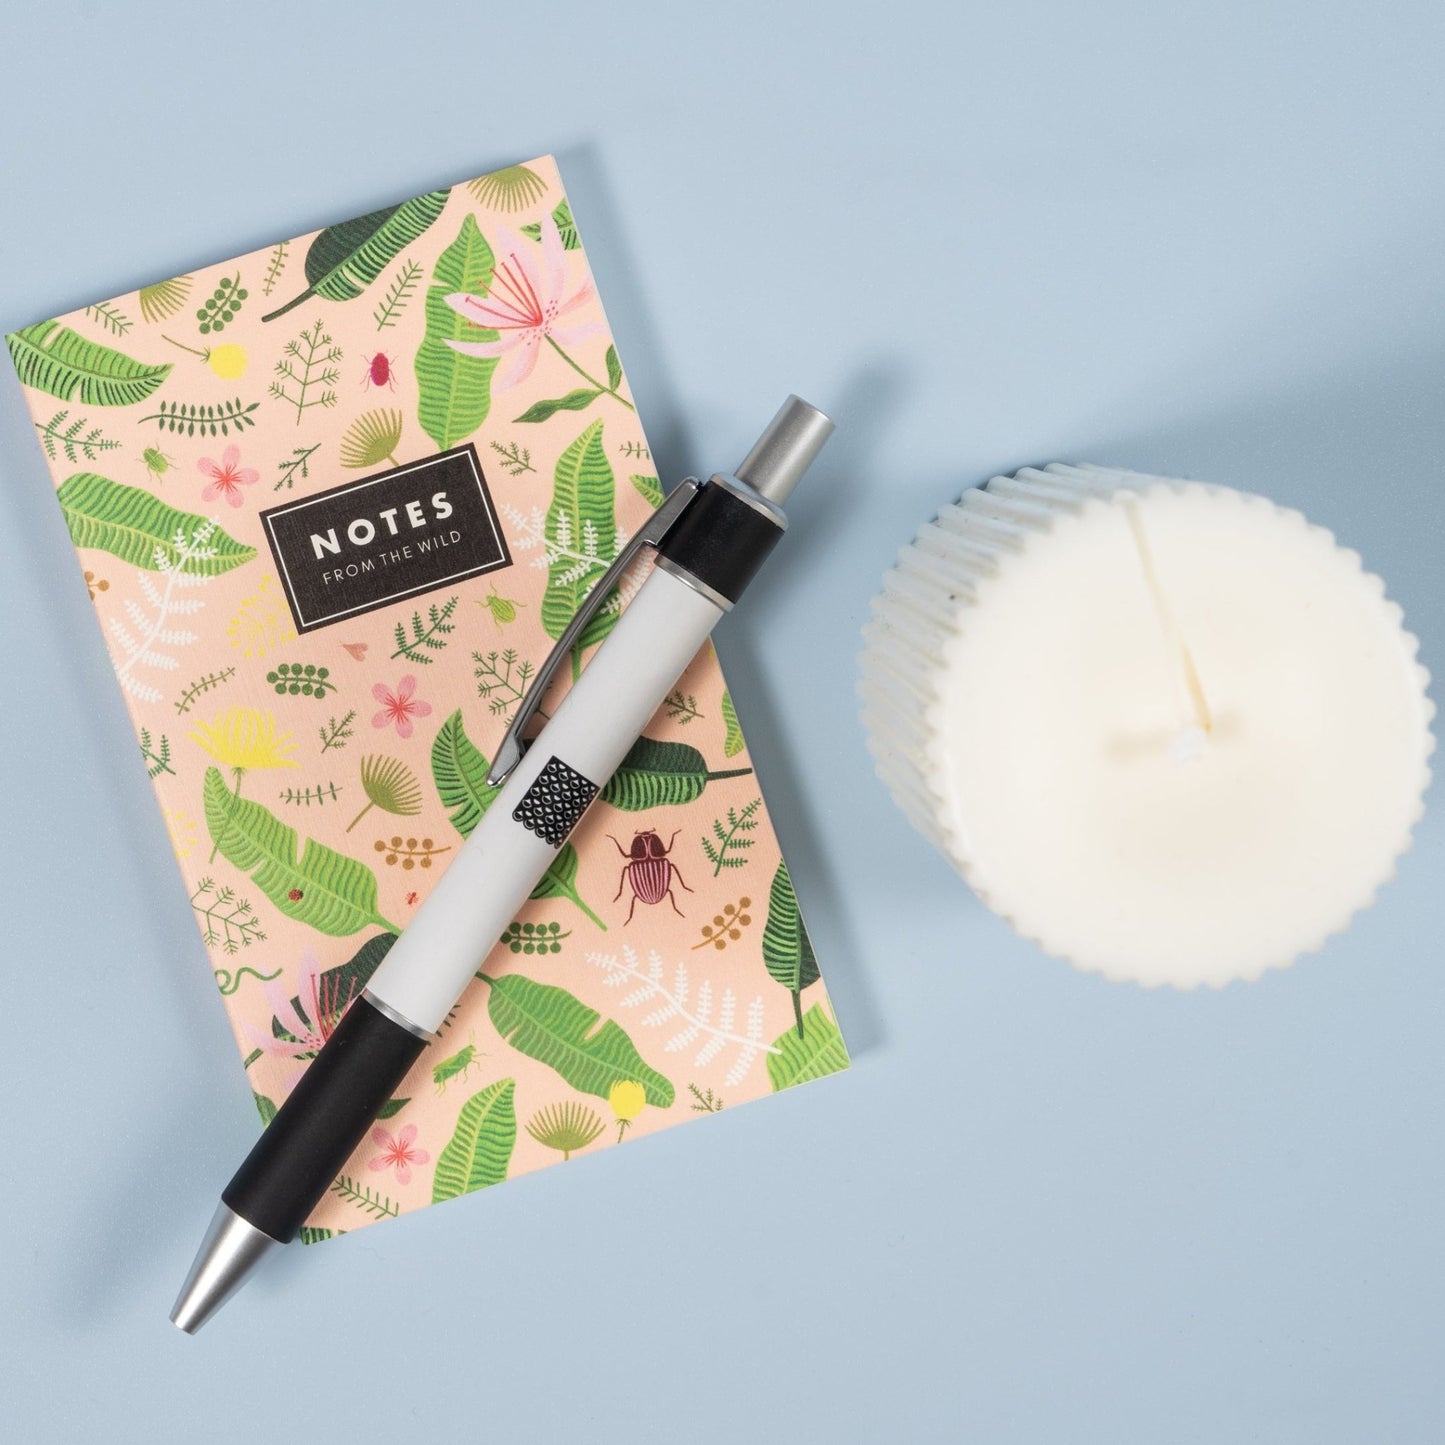 Mini notepad with a pen and candle